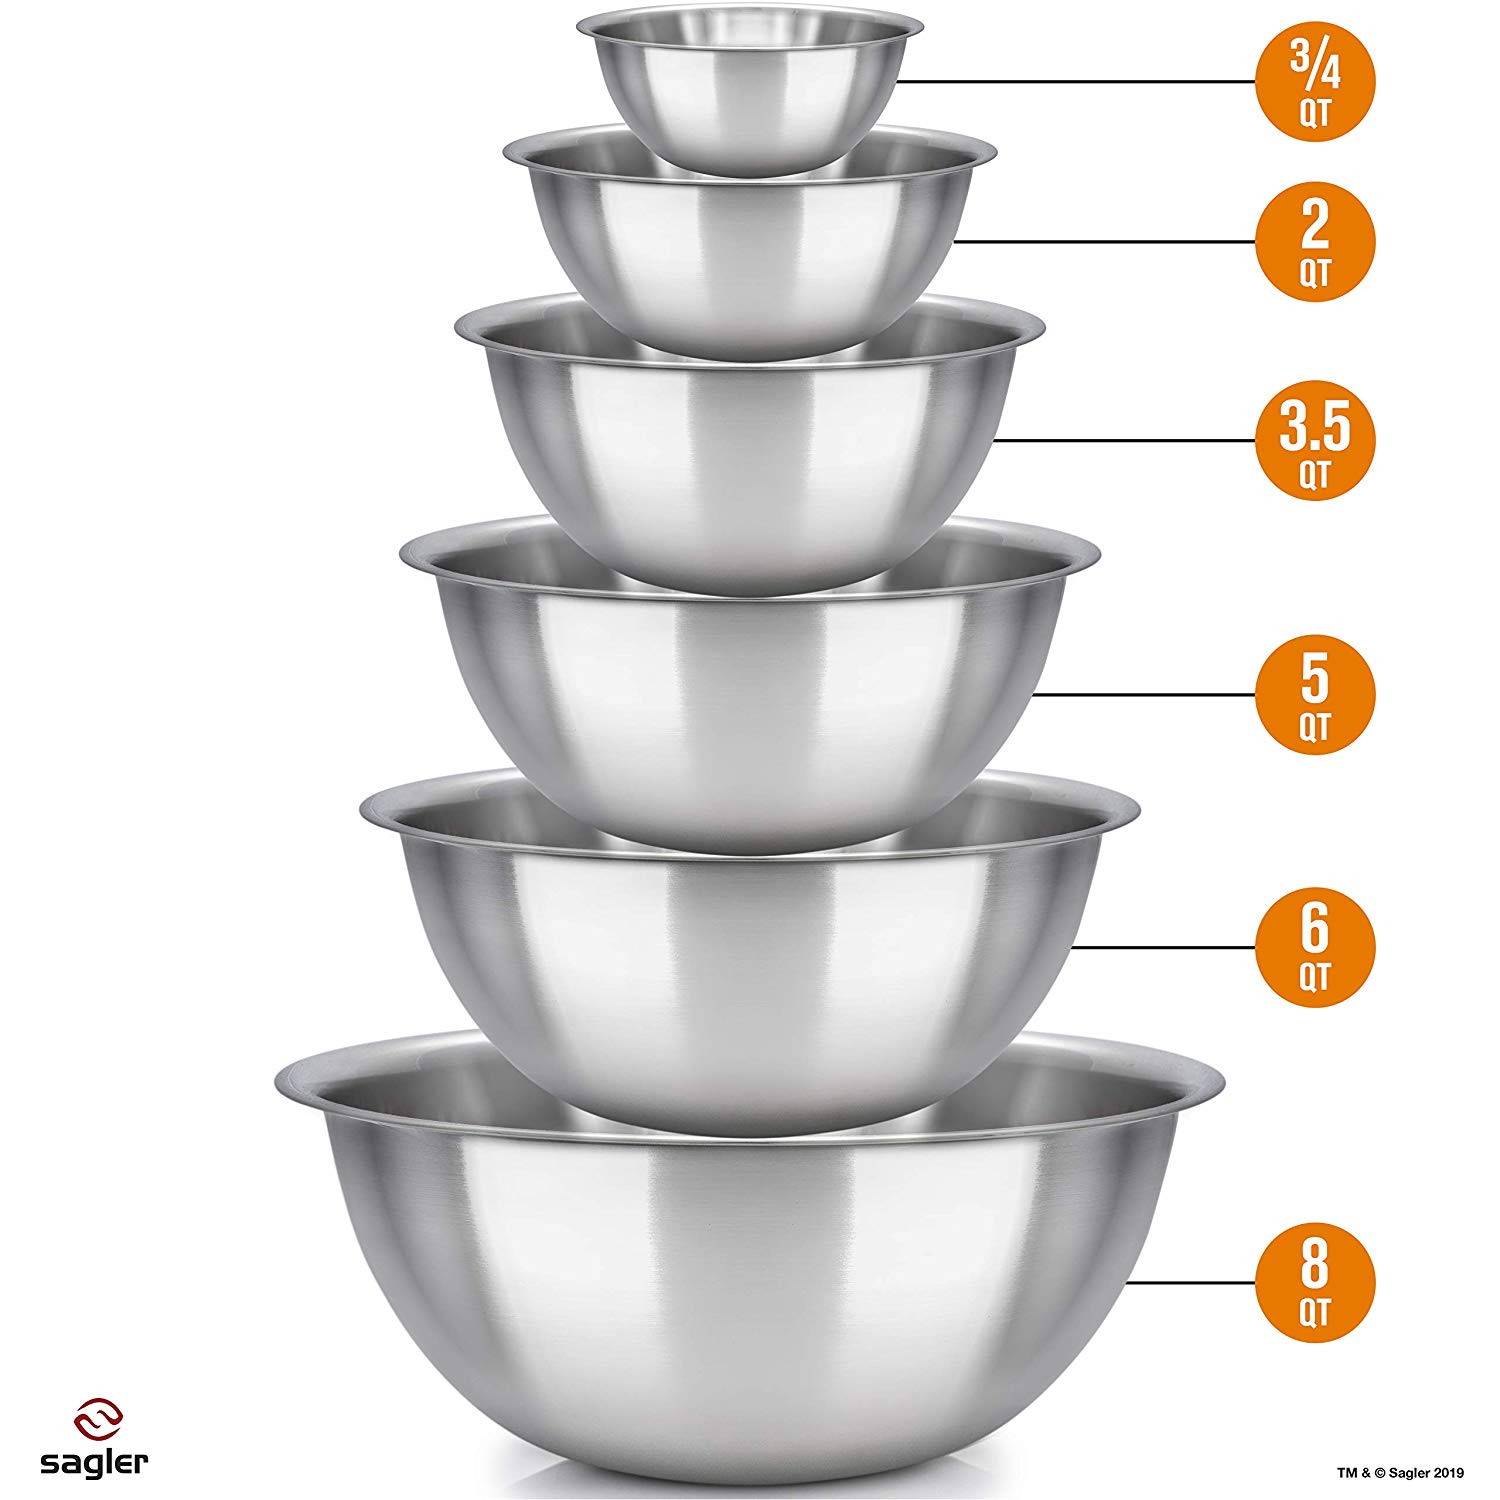 Home-it Set of 6 stainless Steel Mixing Bowls - image 1 of 5